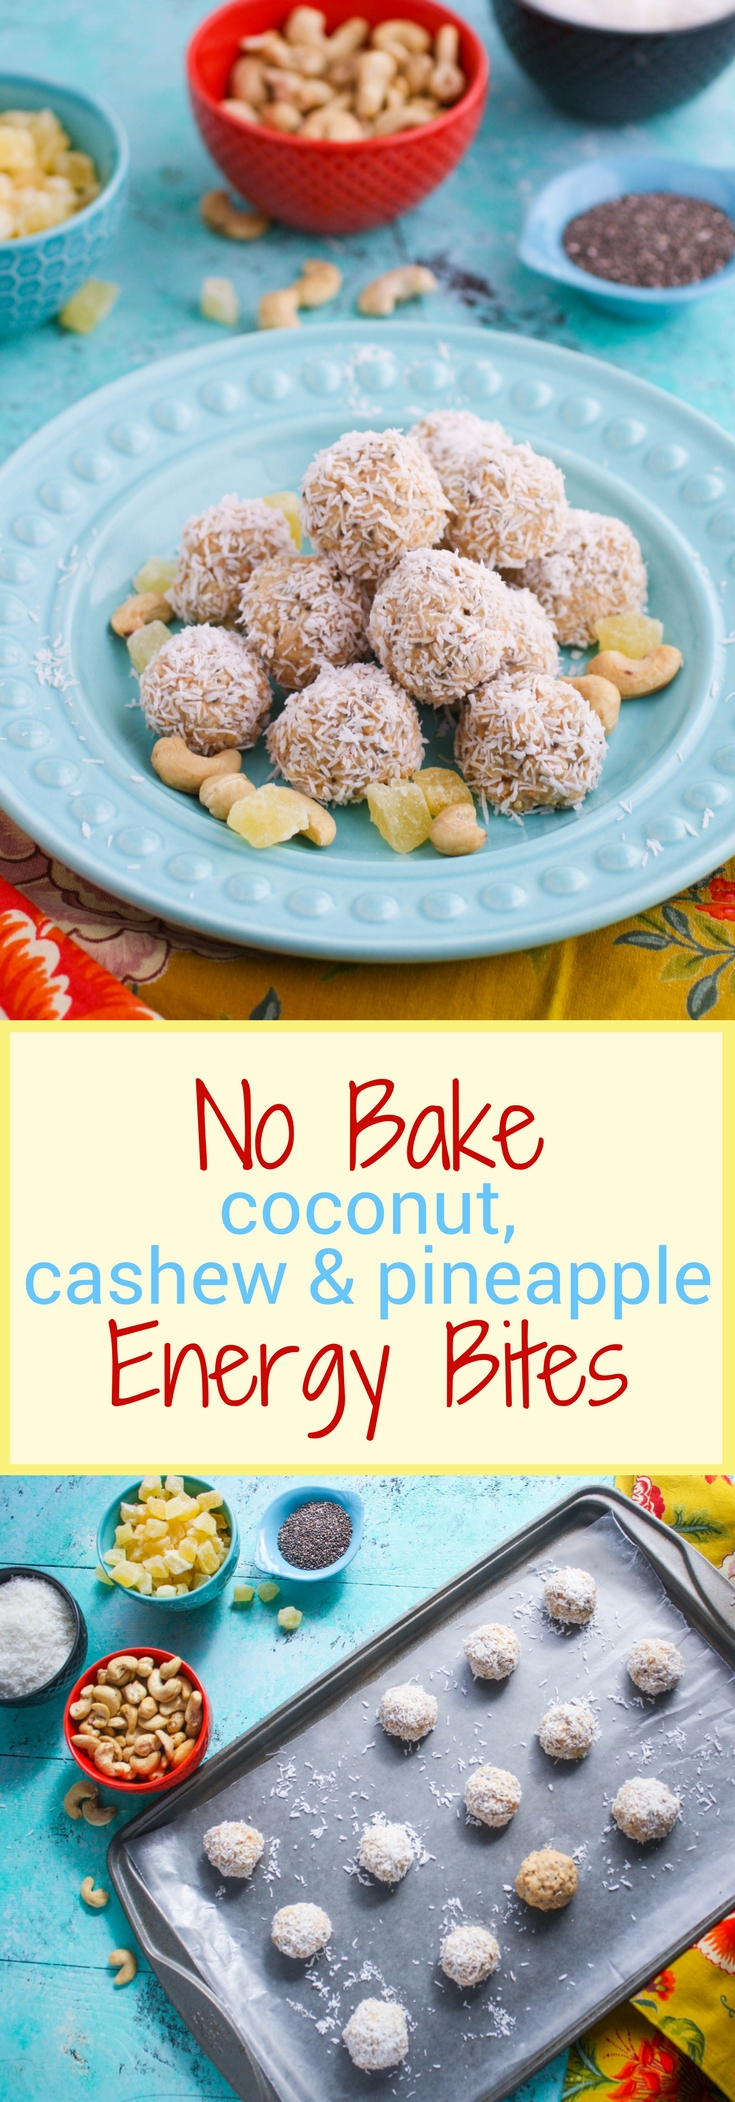 No bake coconut, cashew, and pineapple energy bites make a wonderful, healthy snack. You'll enjoy these no bake energy bites any time of day!